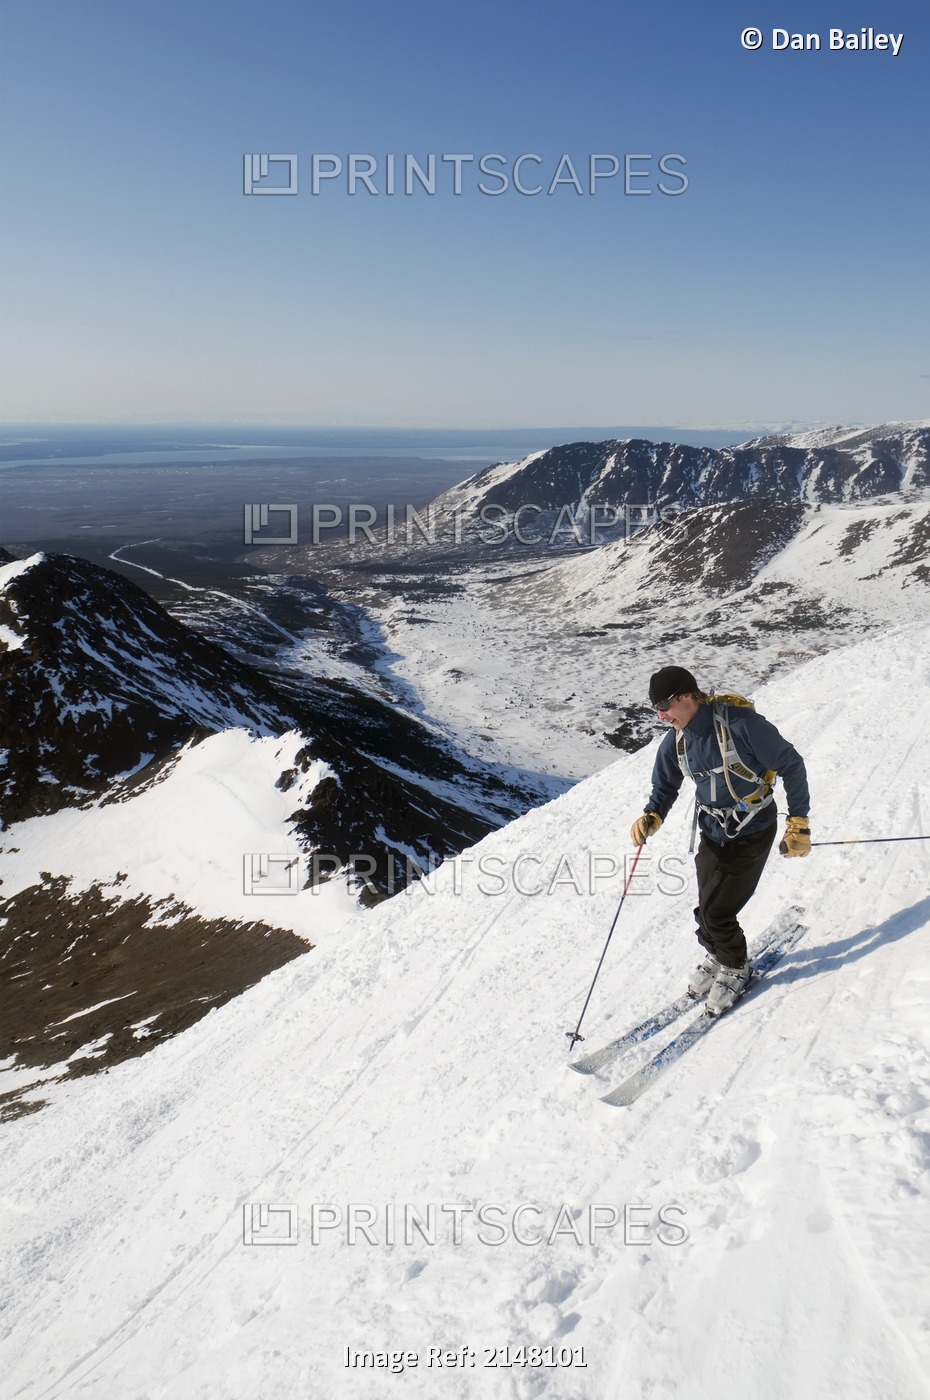 Man Backcountry Skiing From The Summit Of Peak 3 In The Chugach Mountains ...